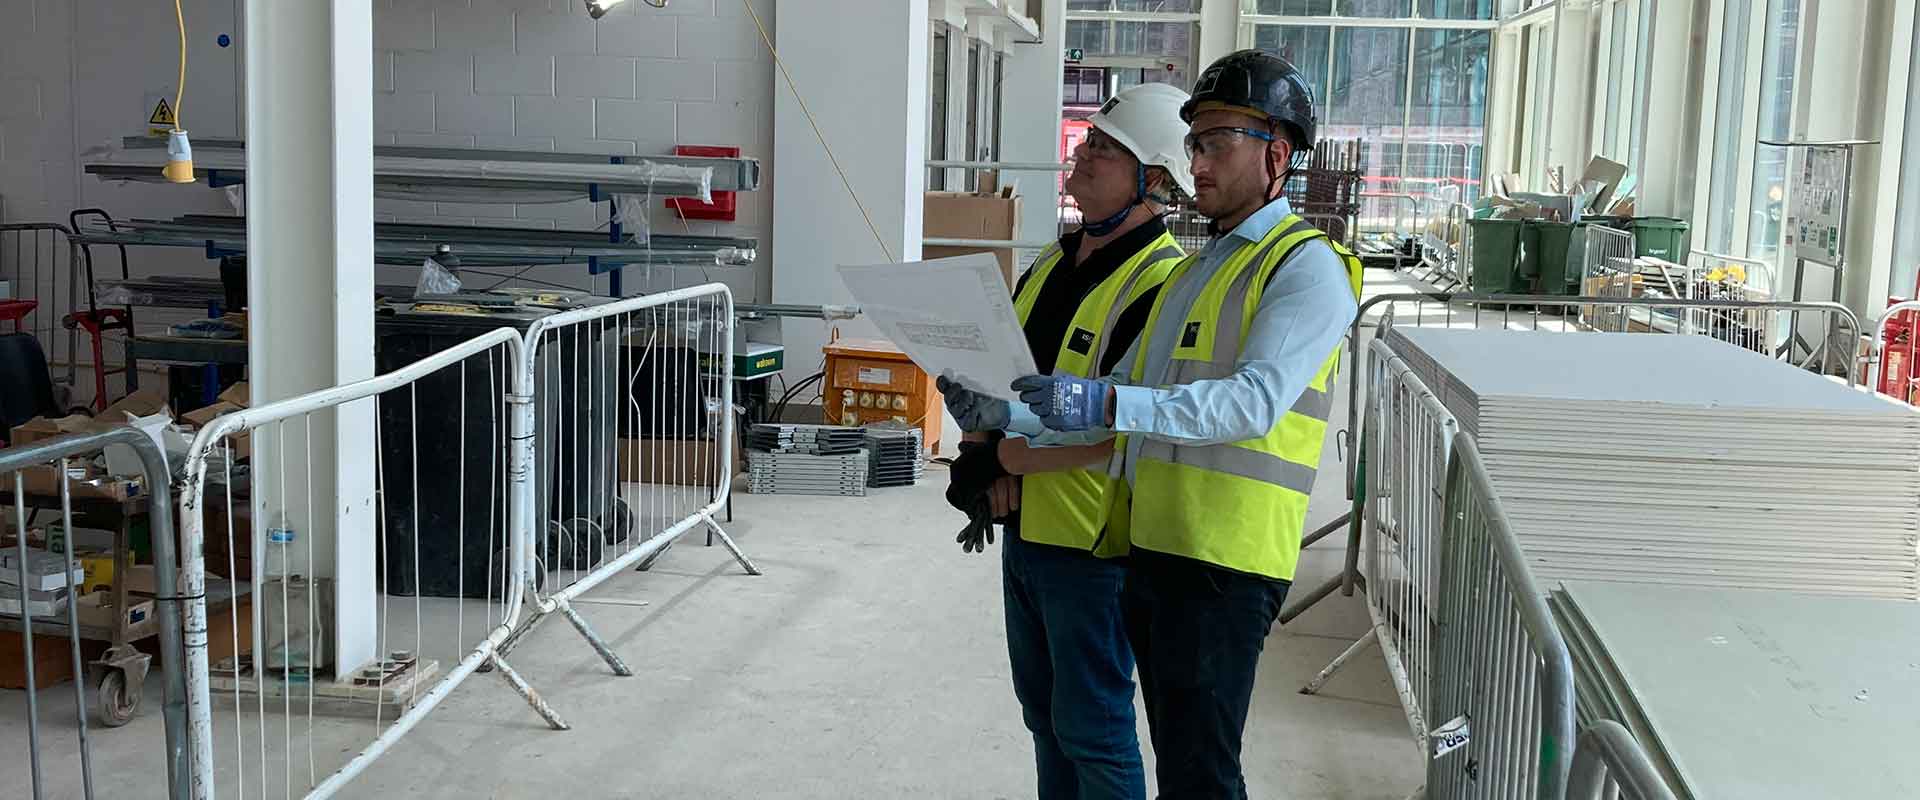 Two ISG employees in PPE looking at plans in the interior of a building under construction